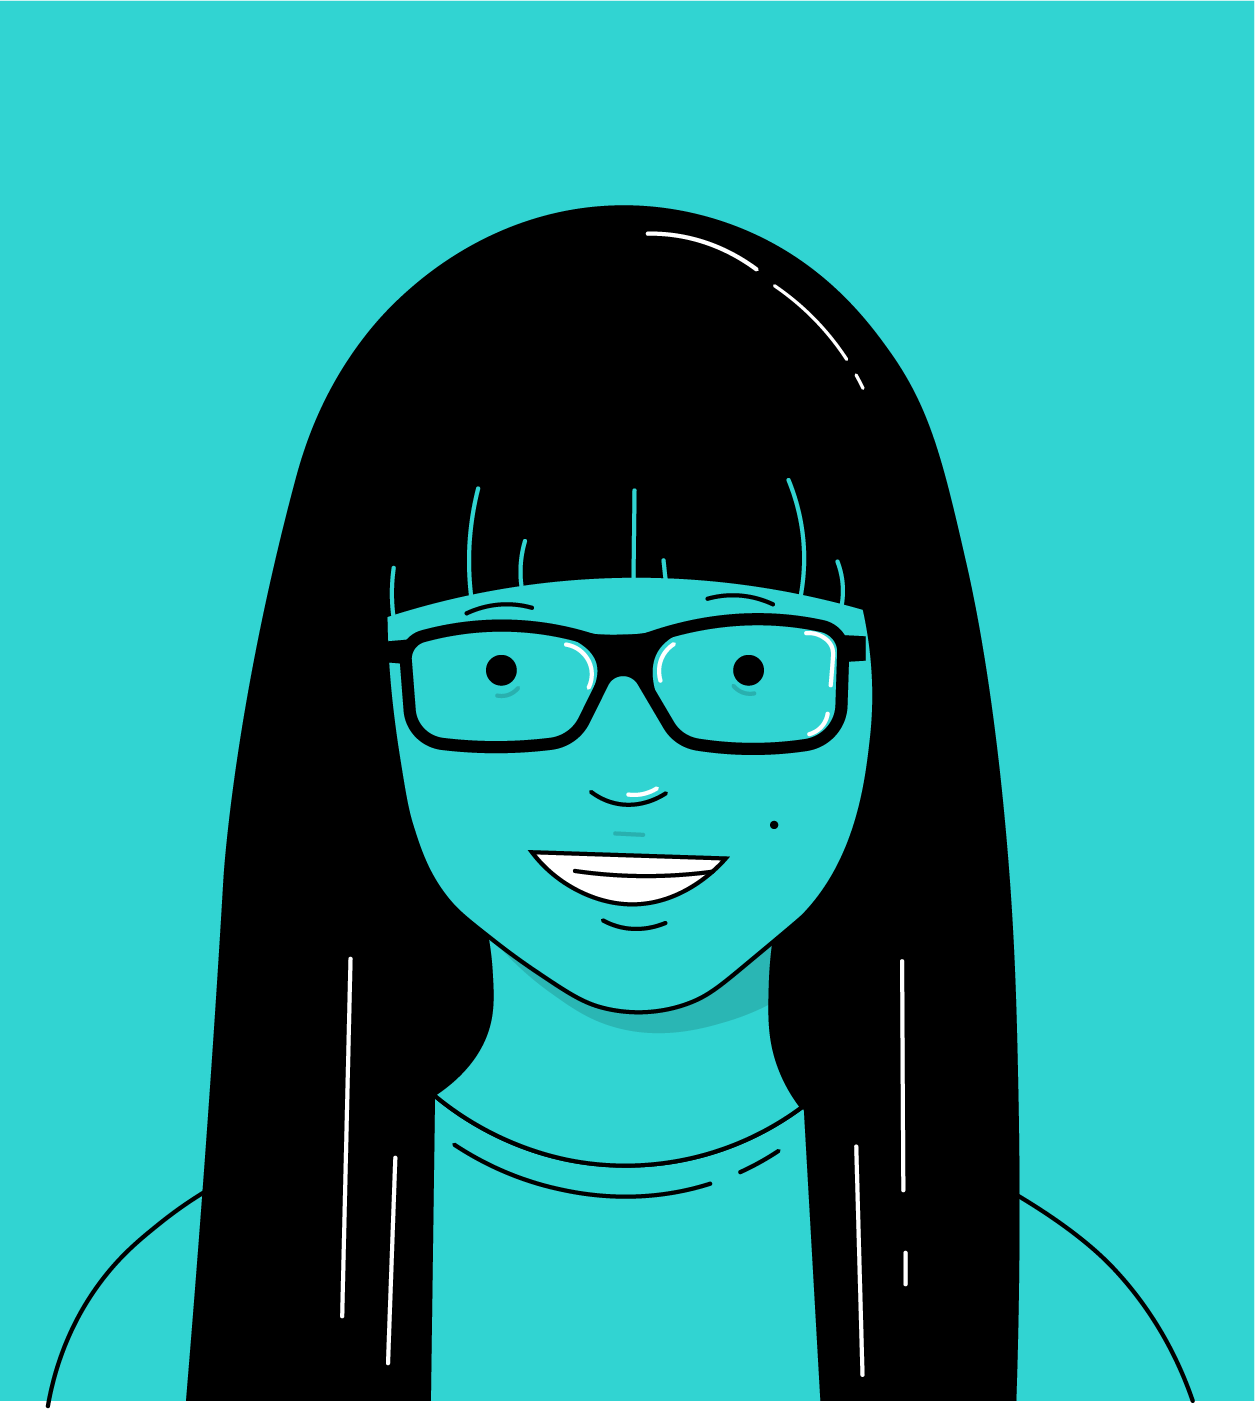 Illustration of a headshot of a smiling girl sporting bangs, and glasses